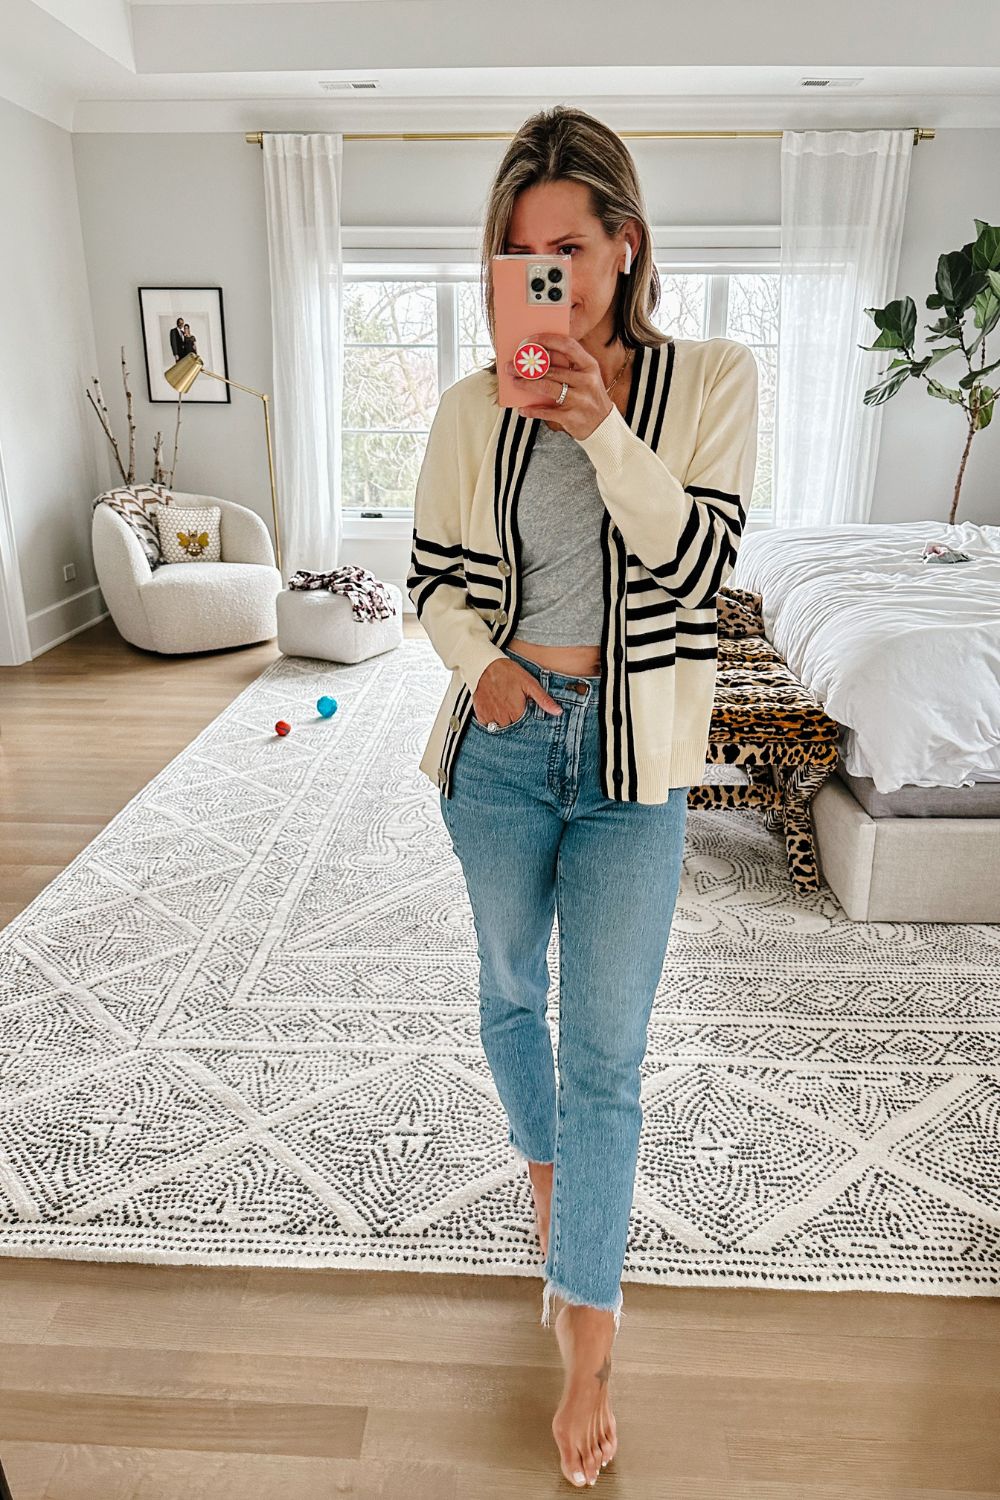 Suzanne wearing a striped cardigan from Evereve with a grey tank and jeans